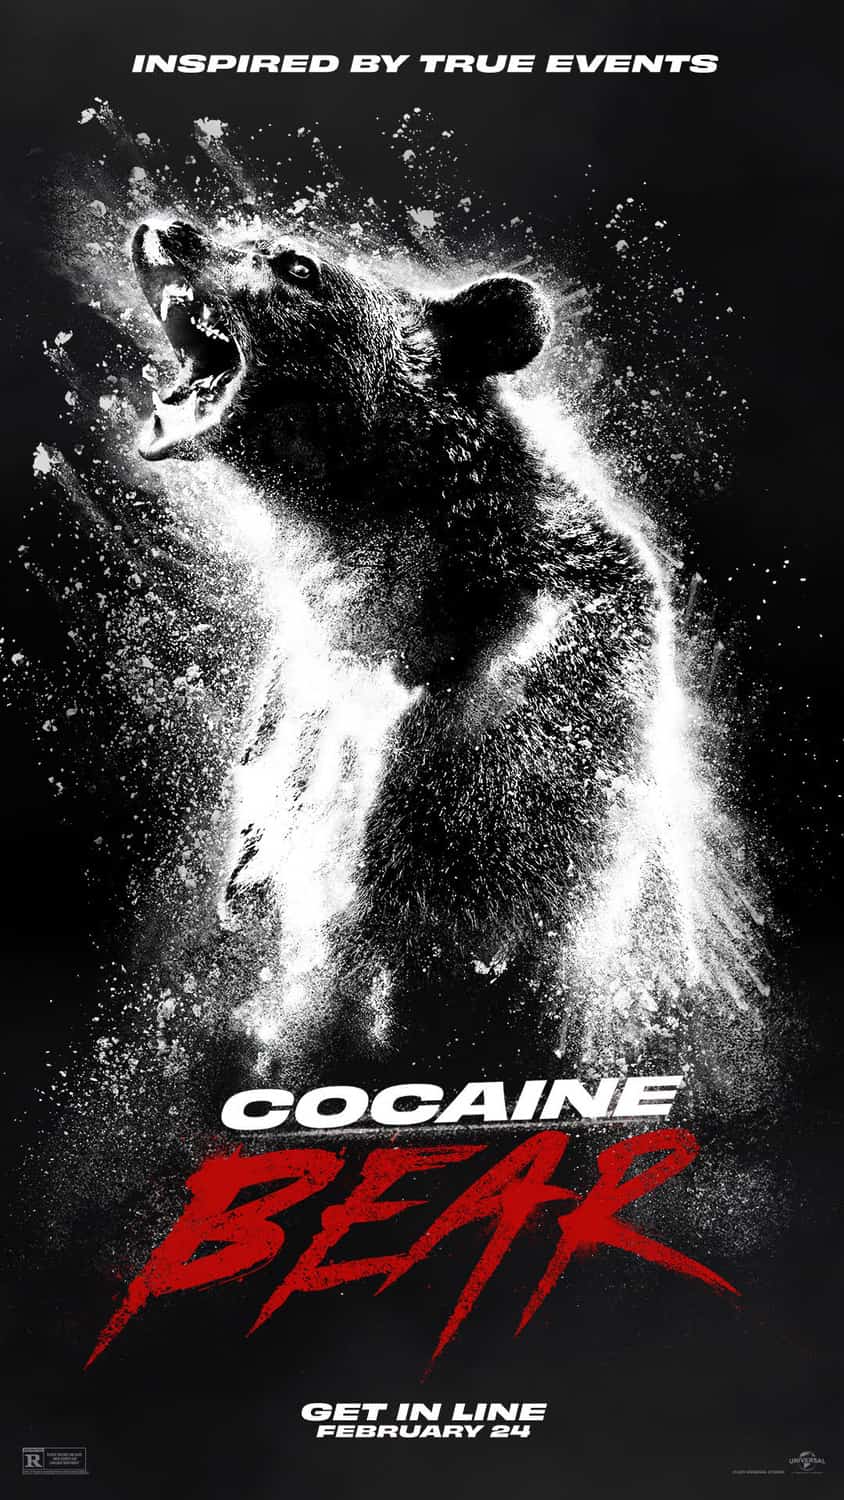 A new trailer released for Cocaine Bear starring Keri Russell - movie UK release date 24th February 2023 #cocainebear